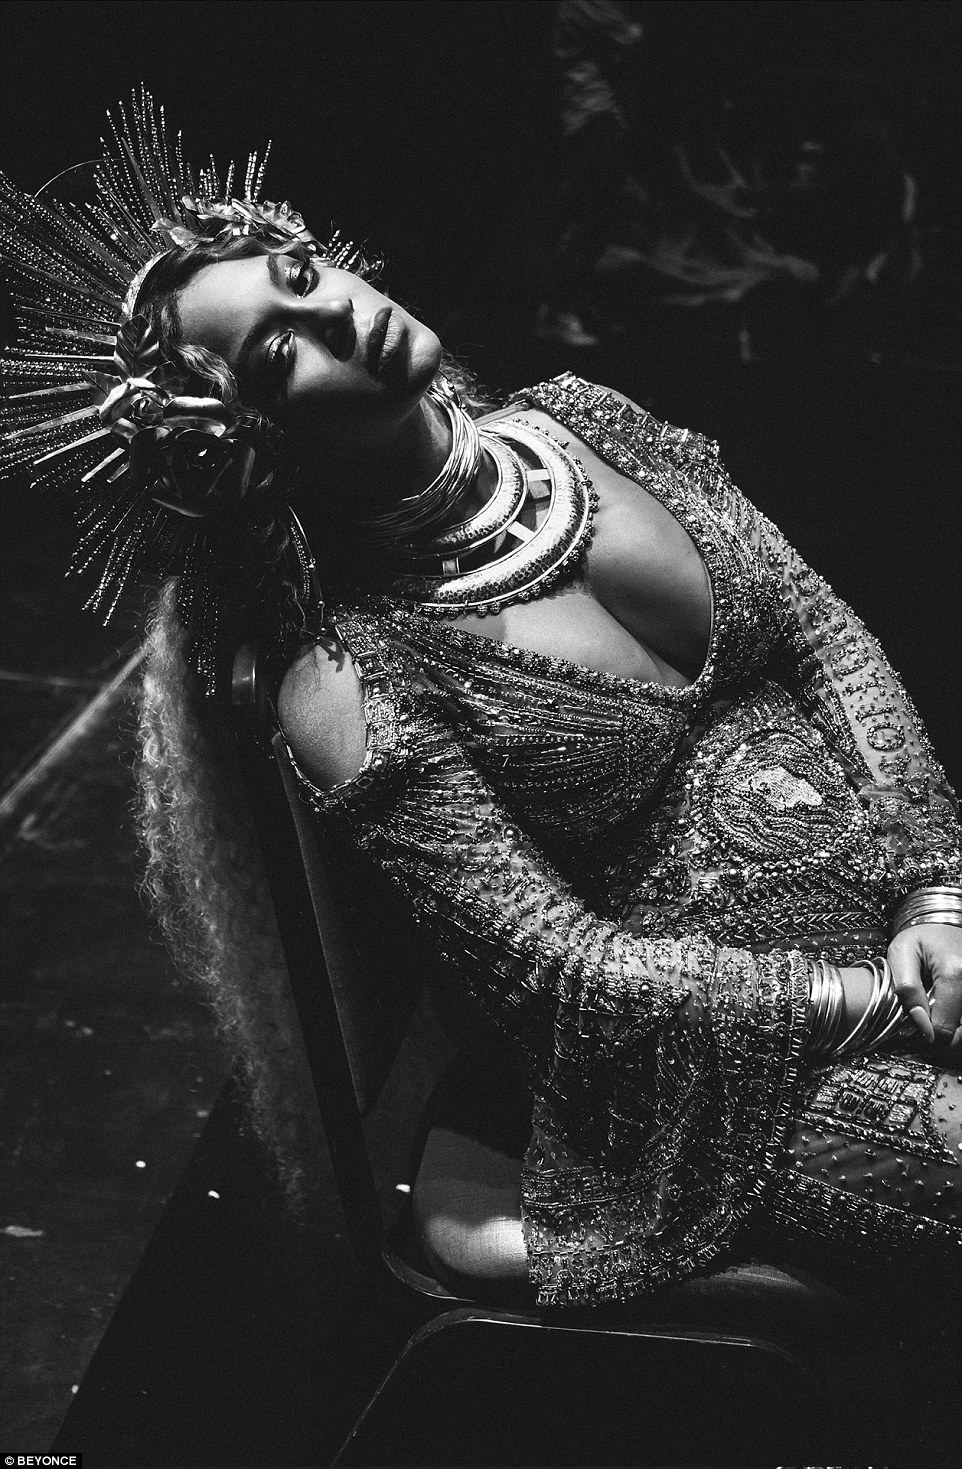 Nonchalant: Bey reclined in another black and white snap, proving she looks glamorous at any angle